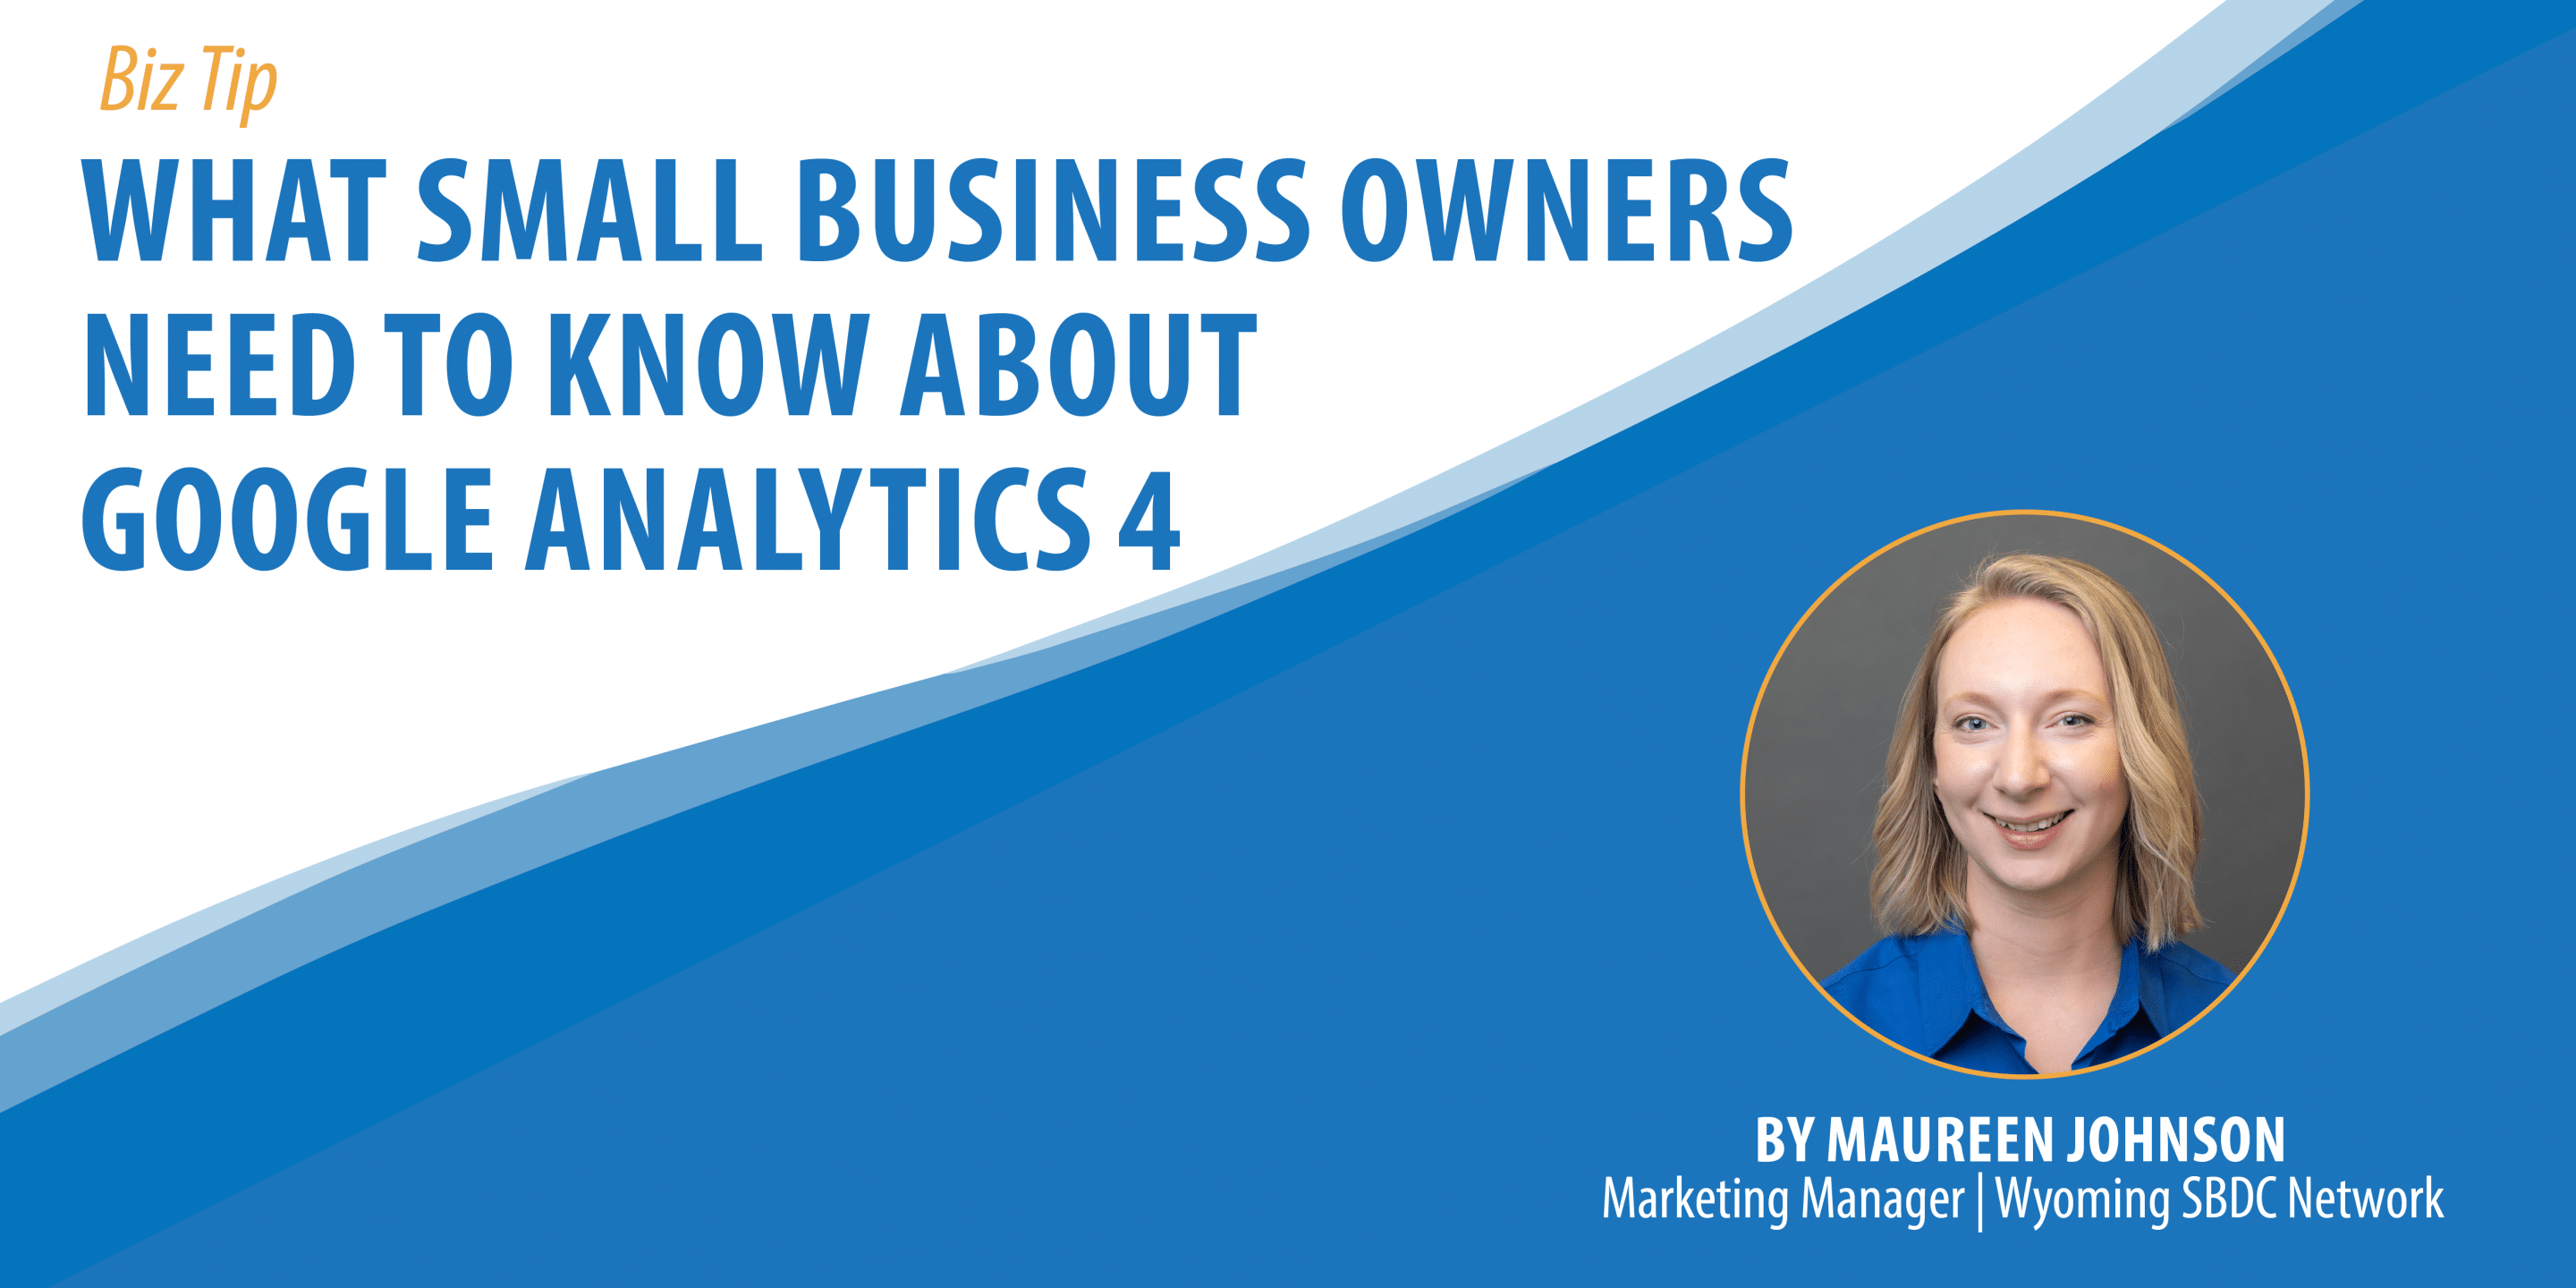 What Small Business Owners Need To Know About Google Analytics 4